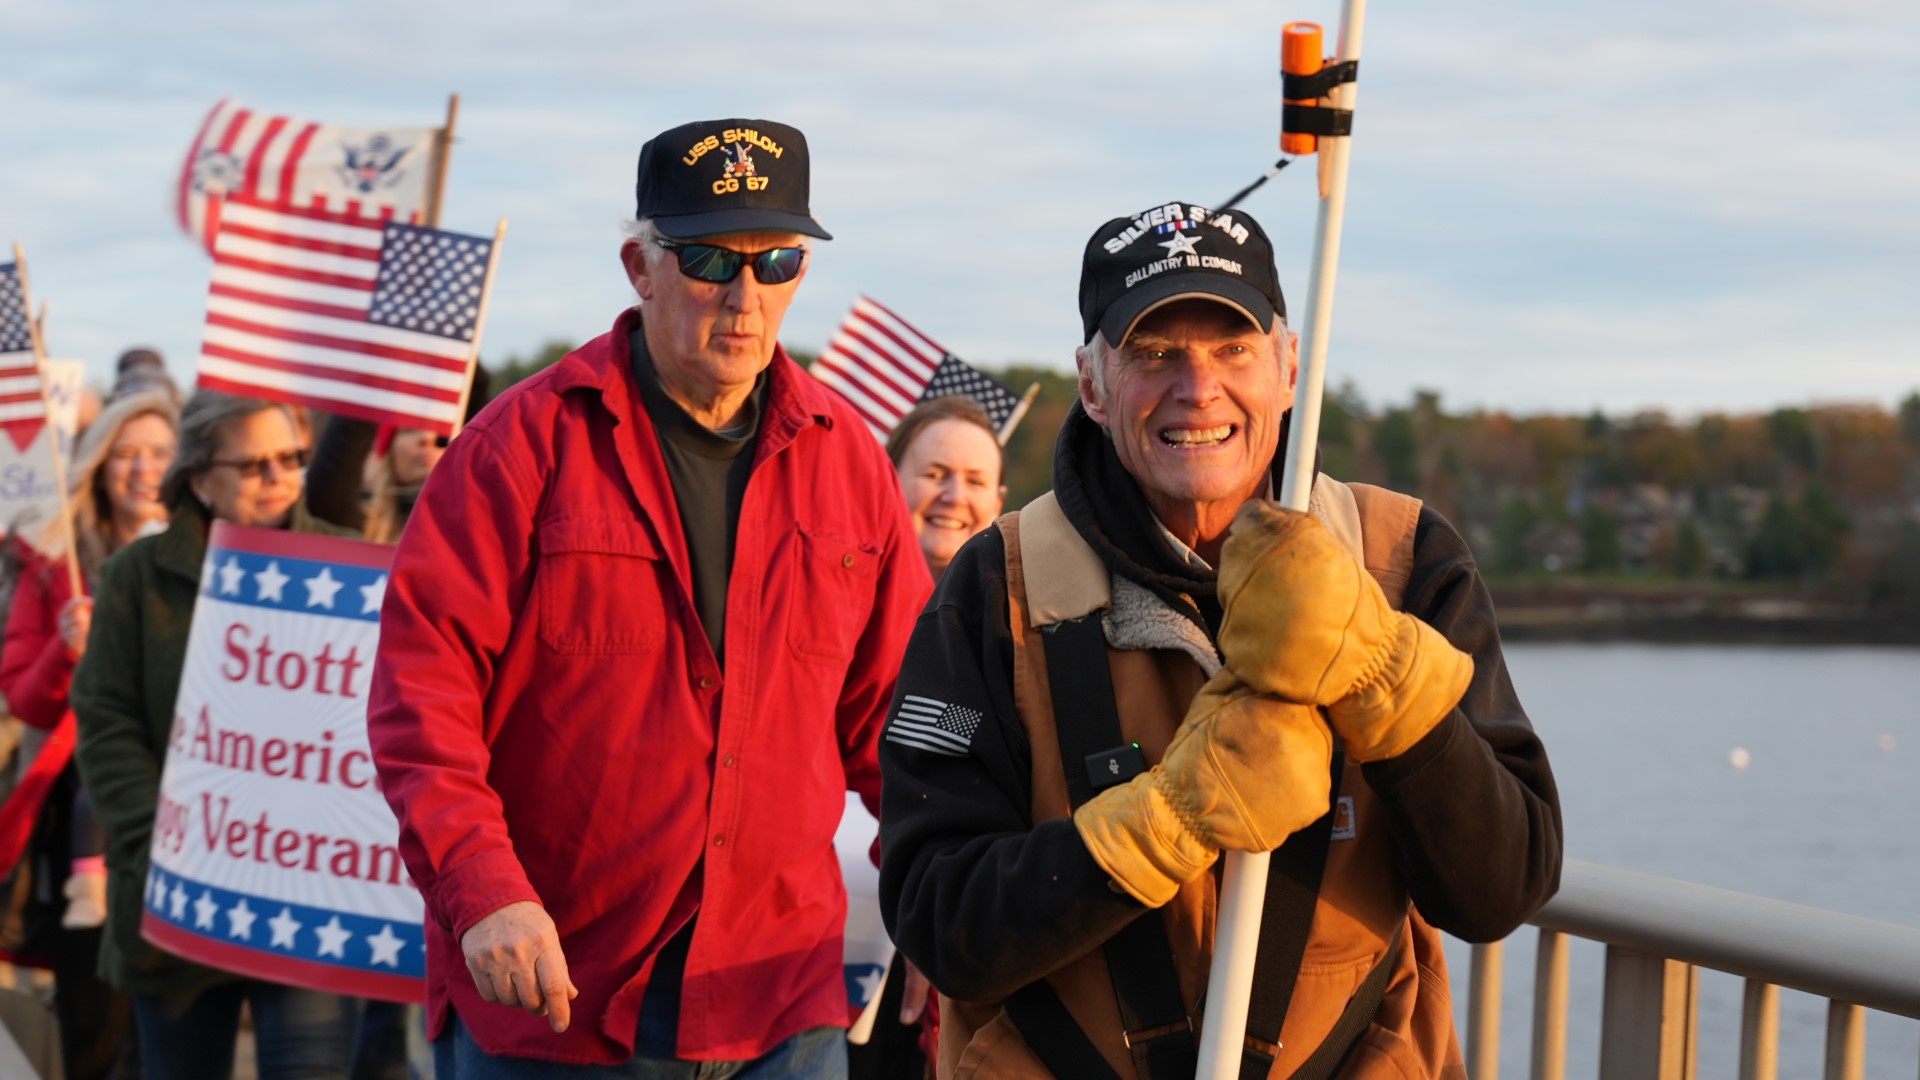 Stott Carleton began walking the bridge in 2019 in memory of his best friend, who was killed before the pair could return home together from Vietnam.